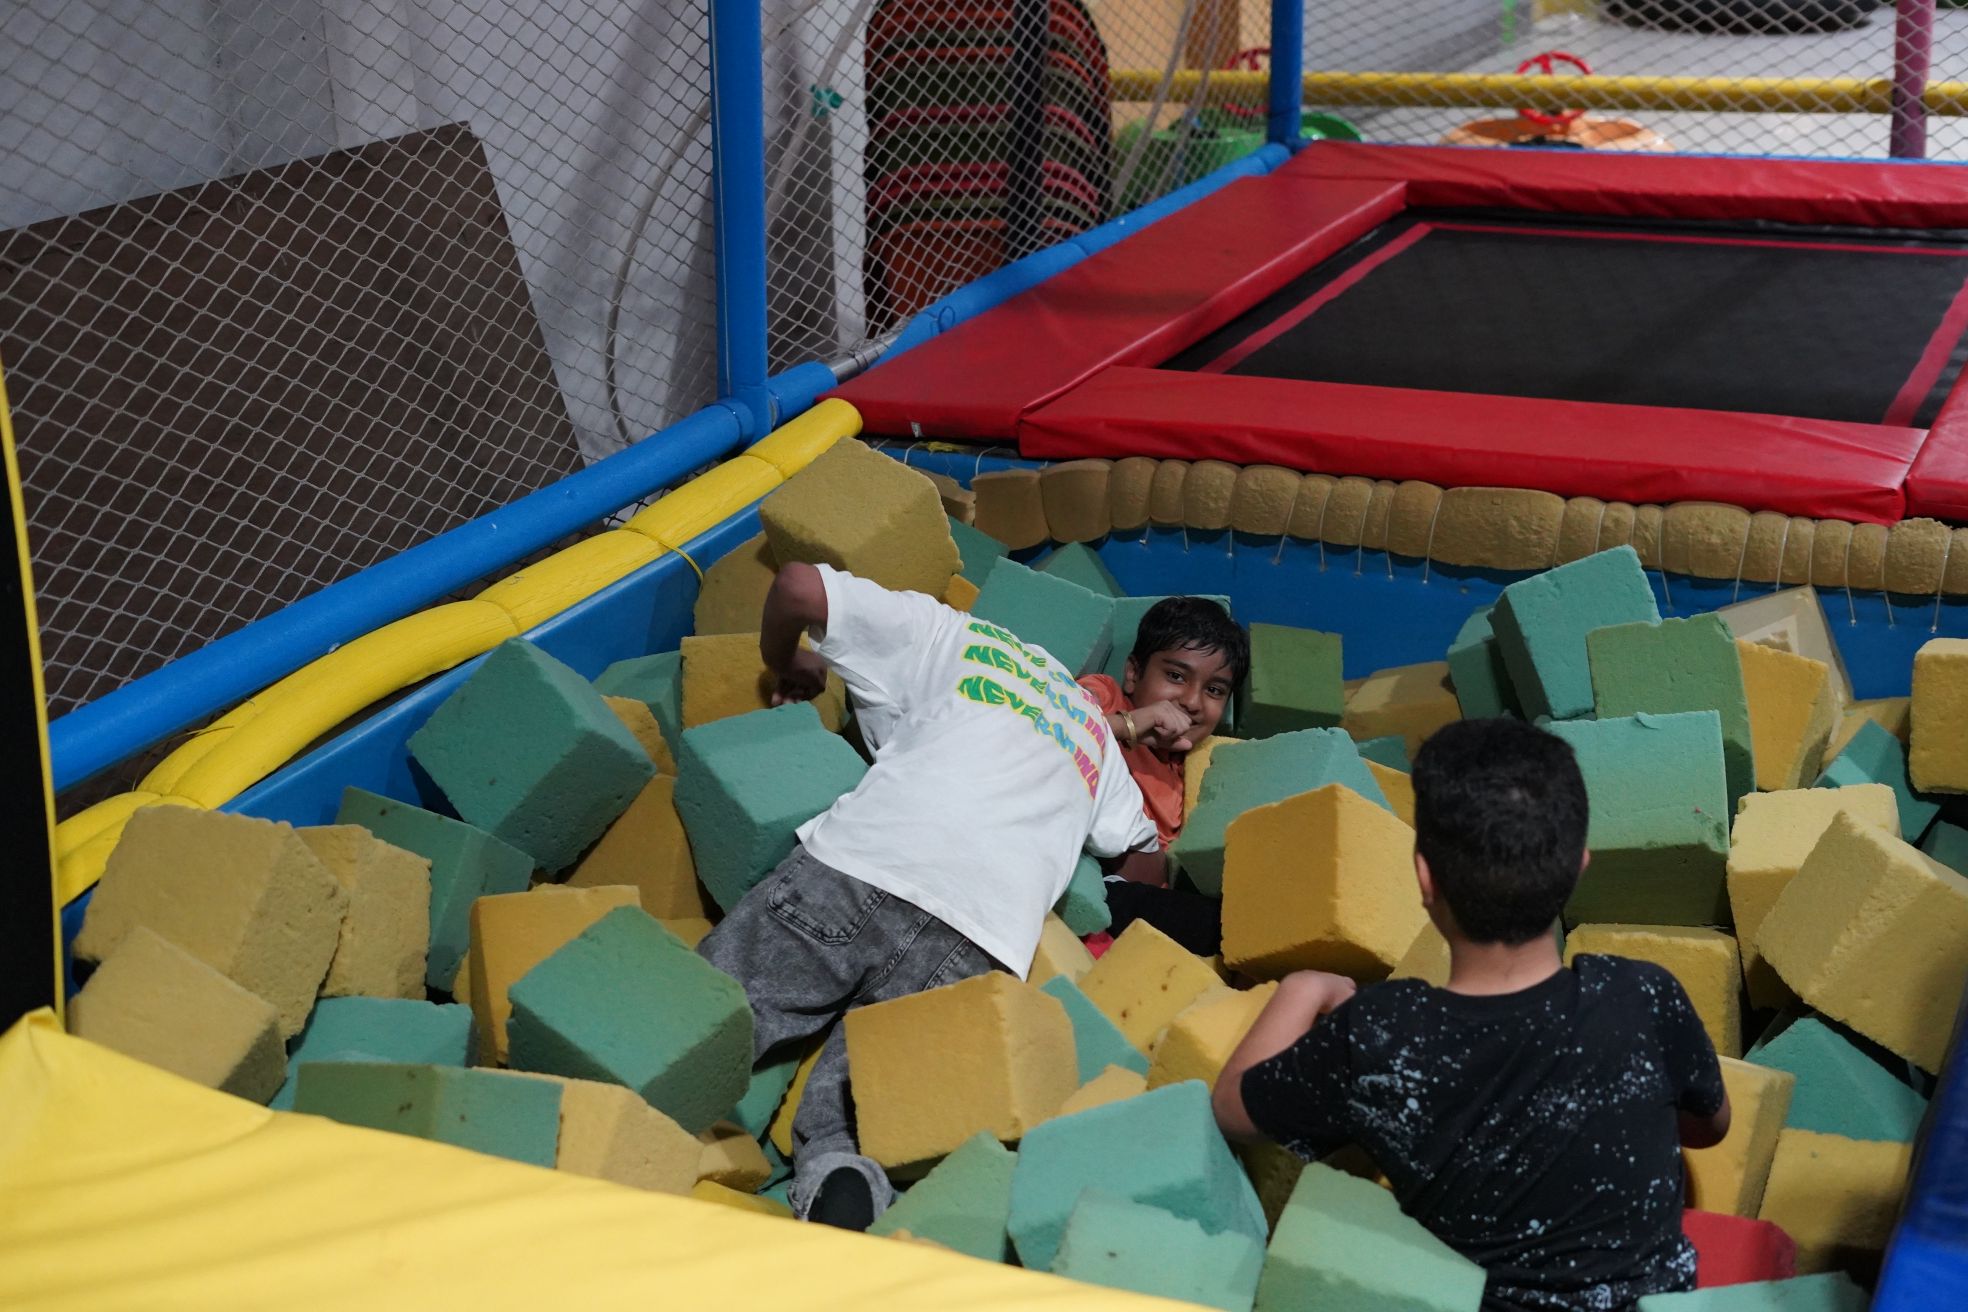 Bouncy Bunch Indore Trampoline zone Photo 2